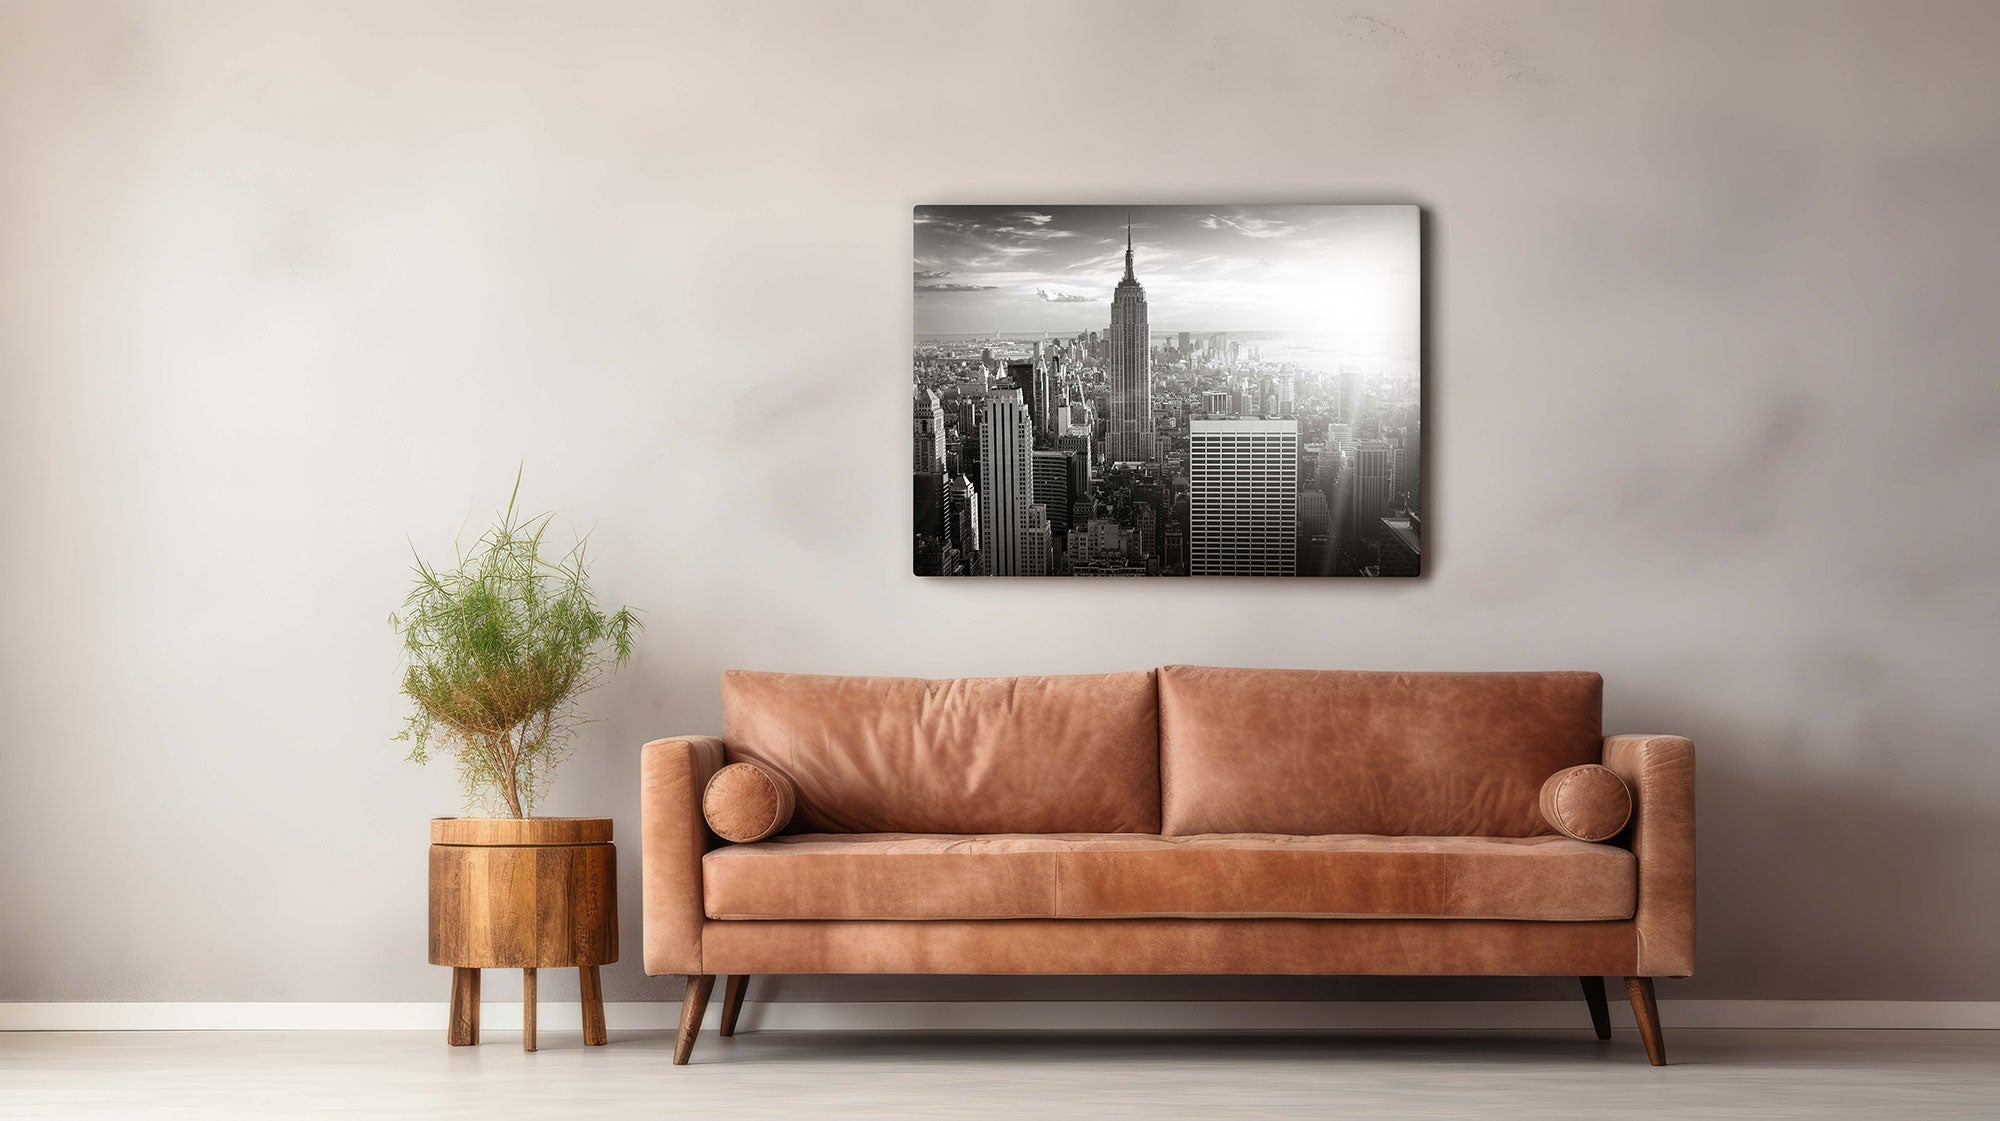 Where to Buy Wall Art Canada